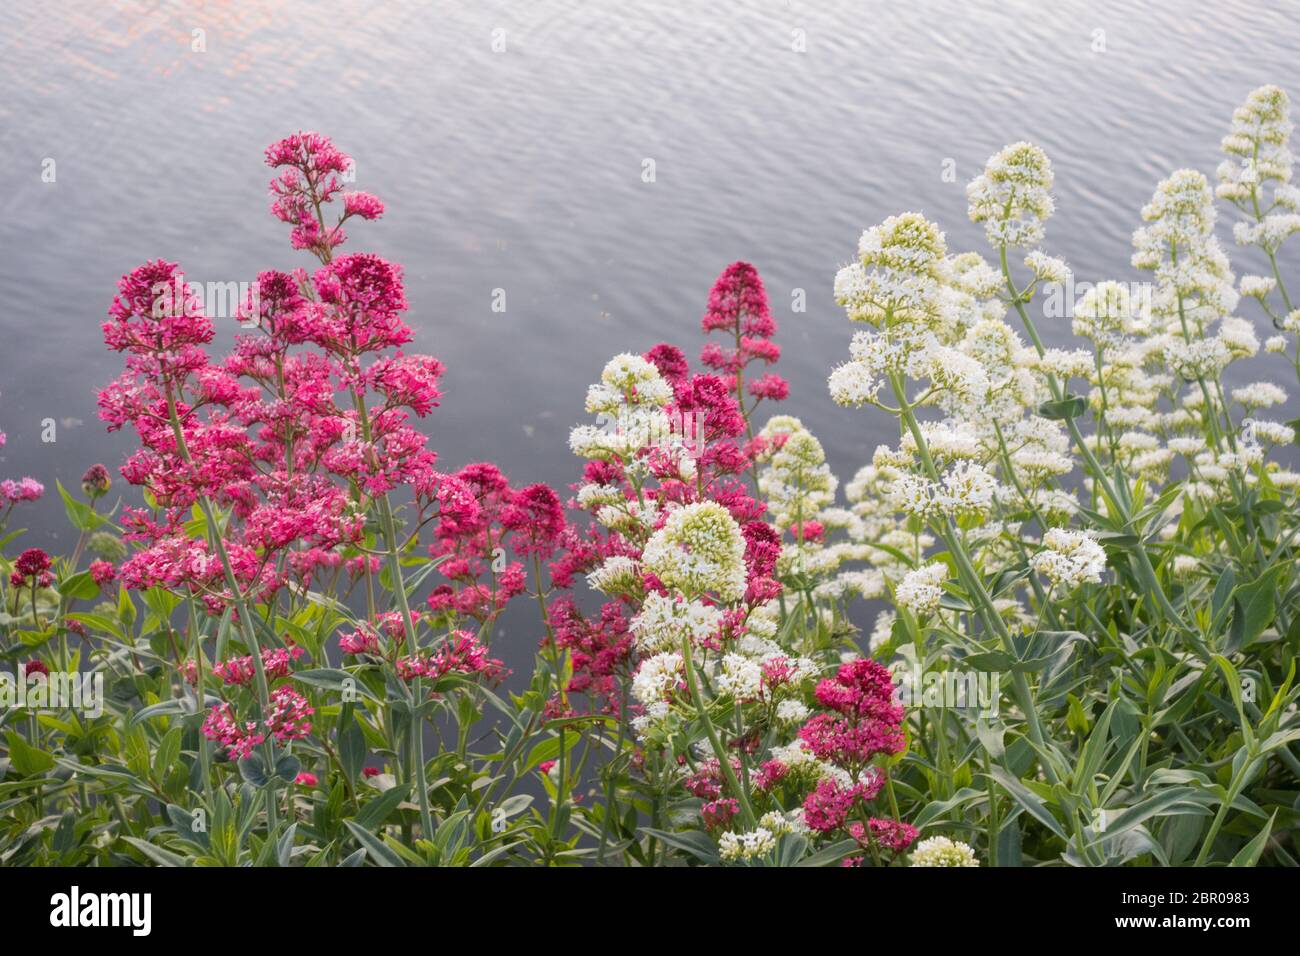 Colourful red and white Valerian (Centranthus ruber and Albus) Stock Photo